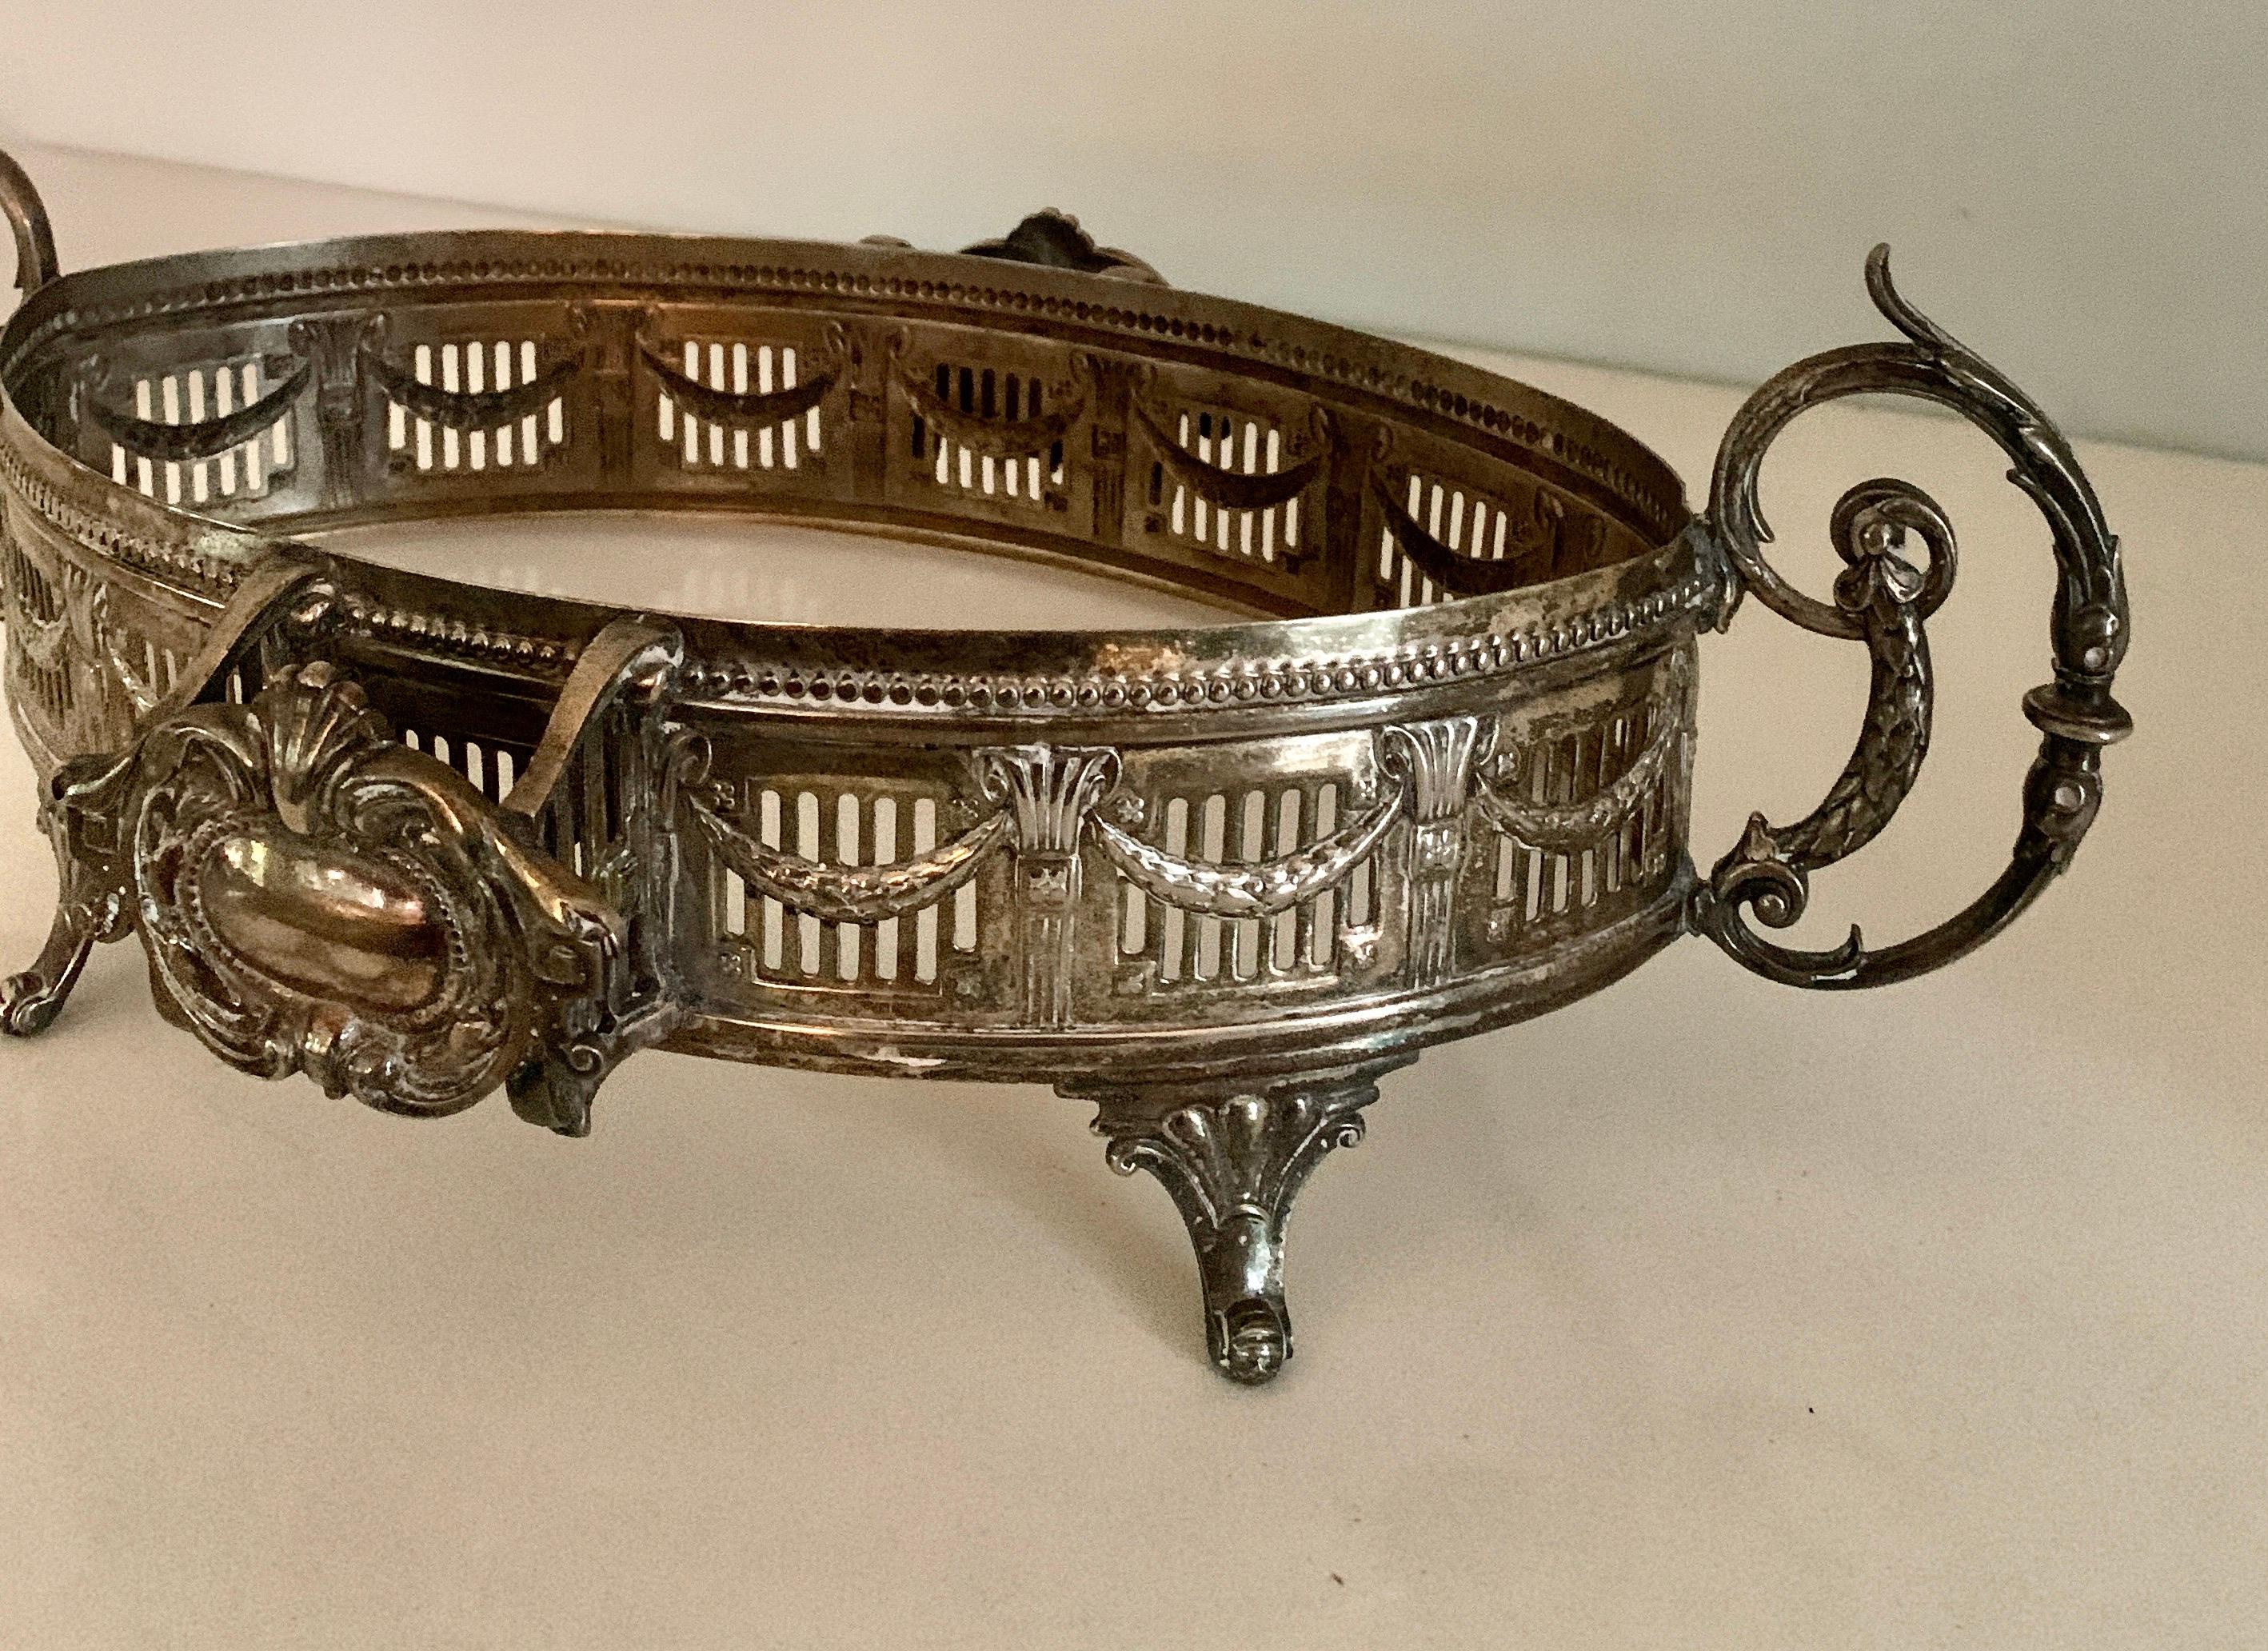 A wonderful and very detailed silver plate tray with wide gallery. Details include handles, and a rope / sash movement around the tray. The piece would be wonderful as a decorative piece on a coffee or cocktail table, for serving small dishes or